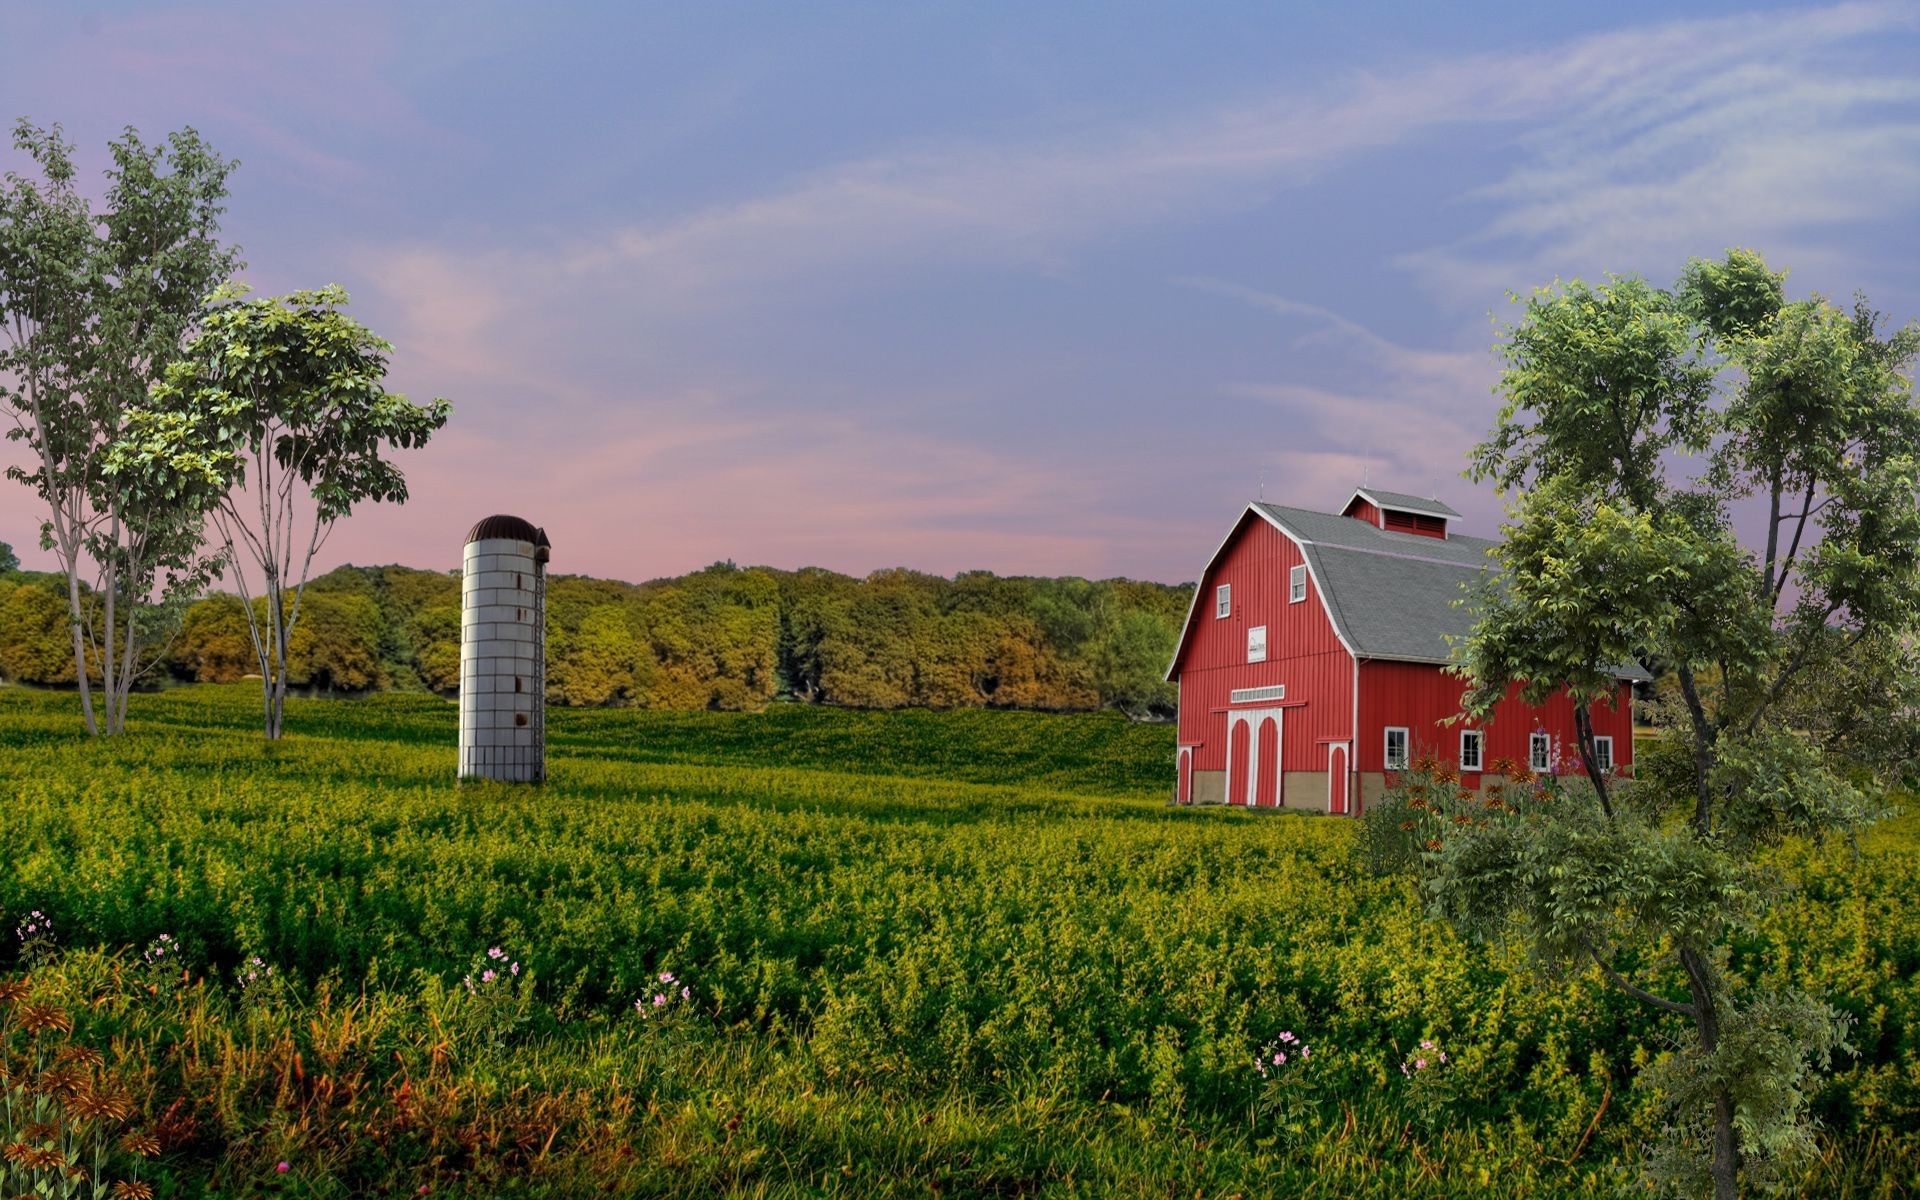 1920x1200 1280x800 country | old country barn wallpaper surreal country scene  wallpaper">